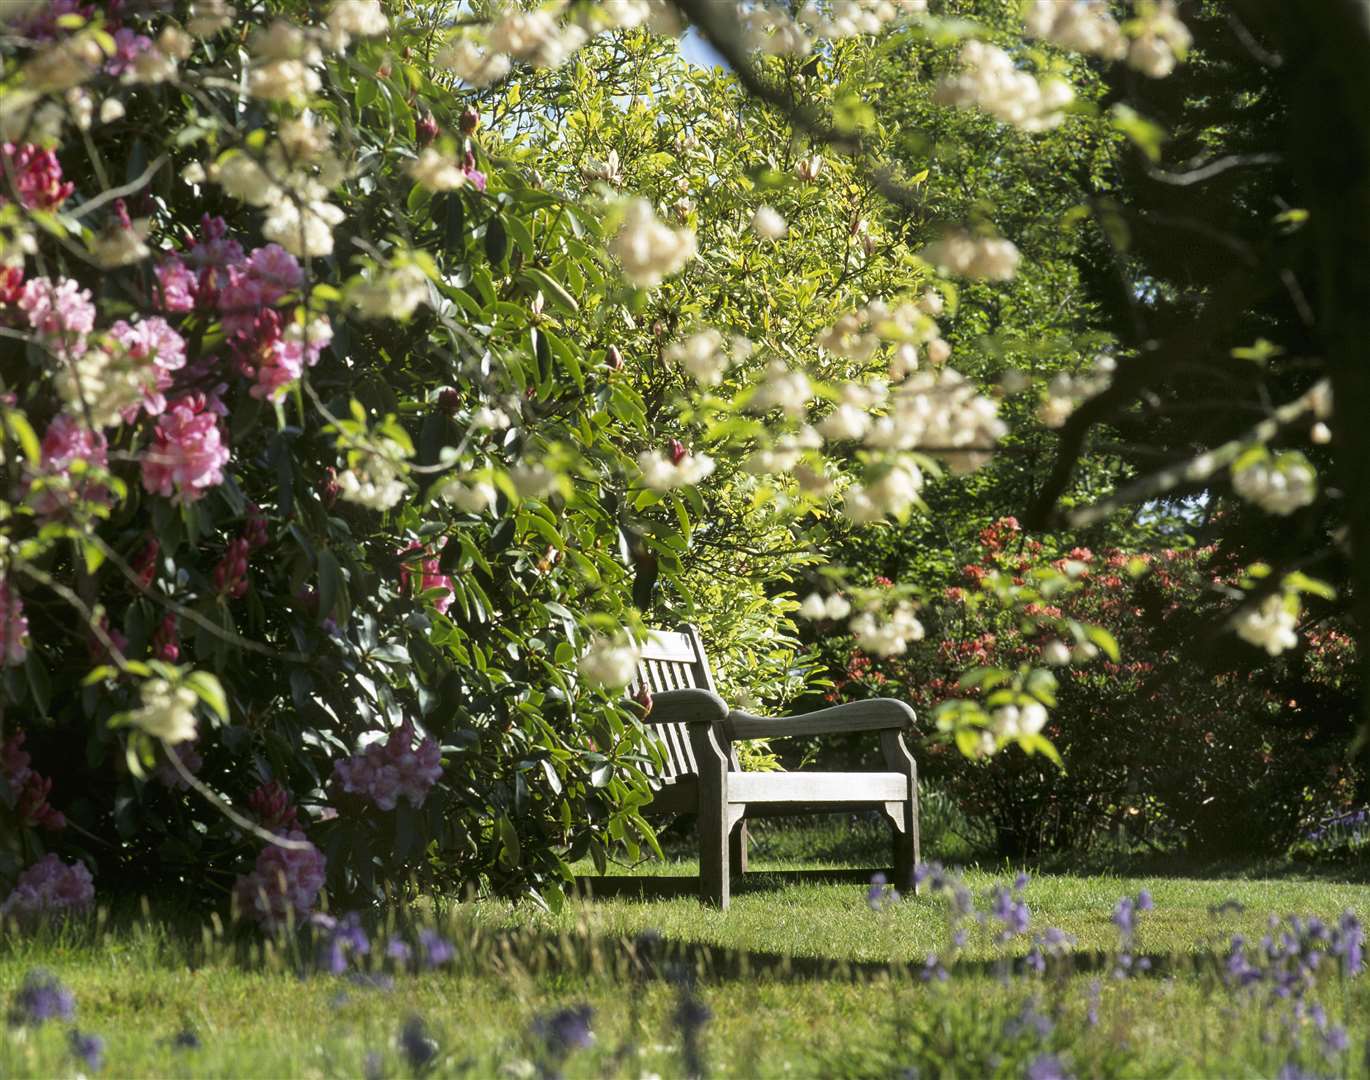 The trees will be in blossom this spring at Emmetts Garden. Picture: © National Trust Images / David Sellman